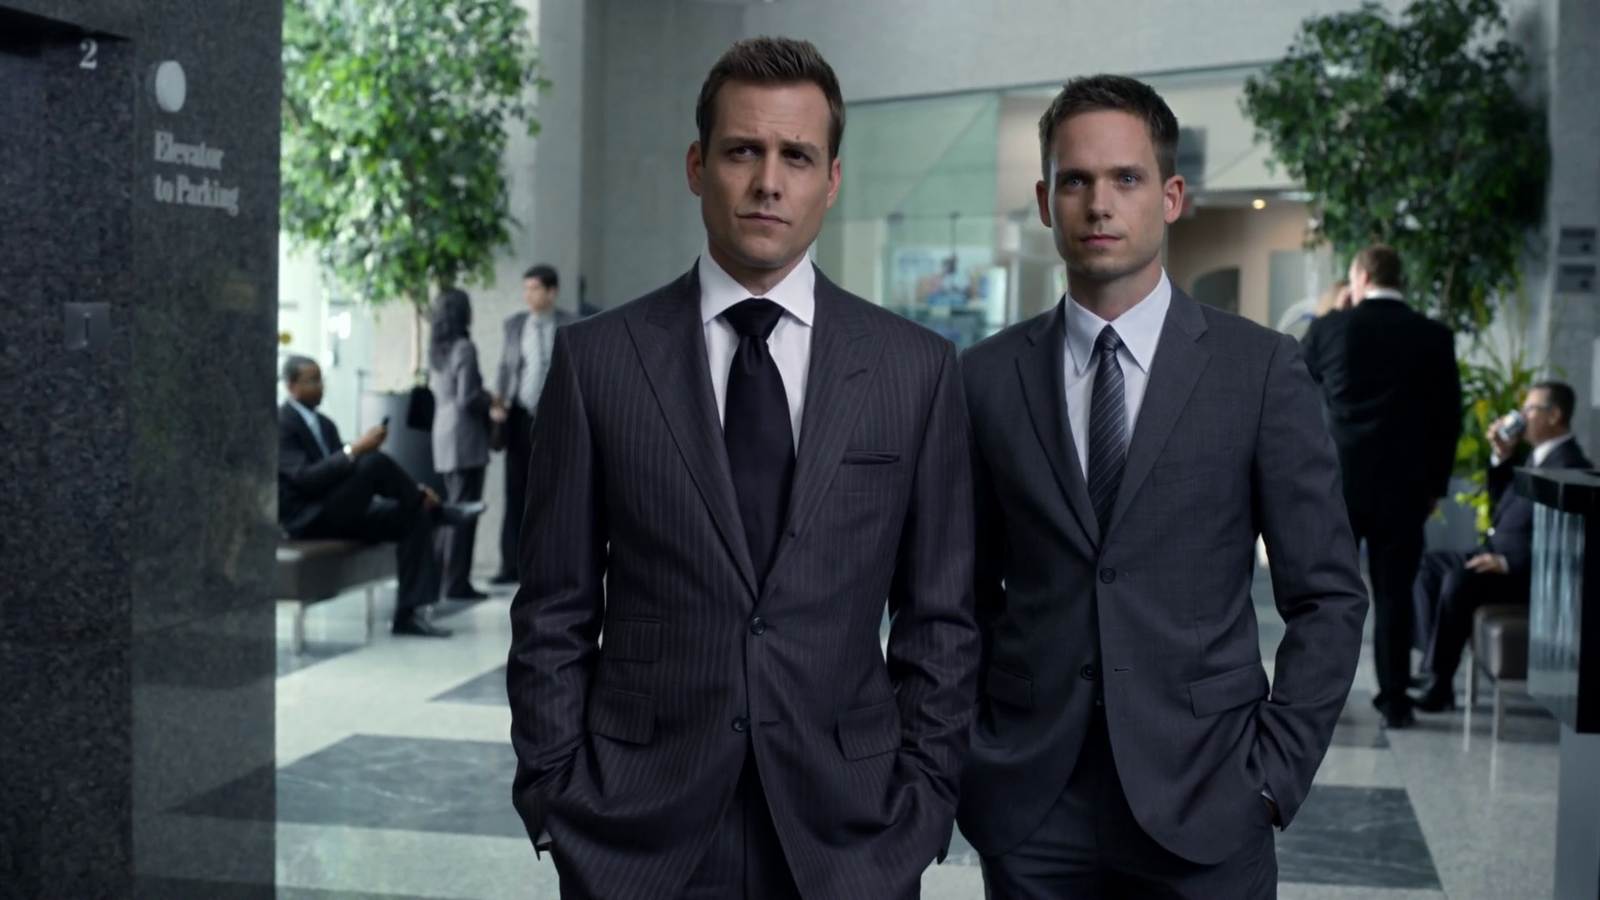 Harvey Specter and Michael Ross - Suits. 